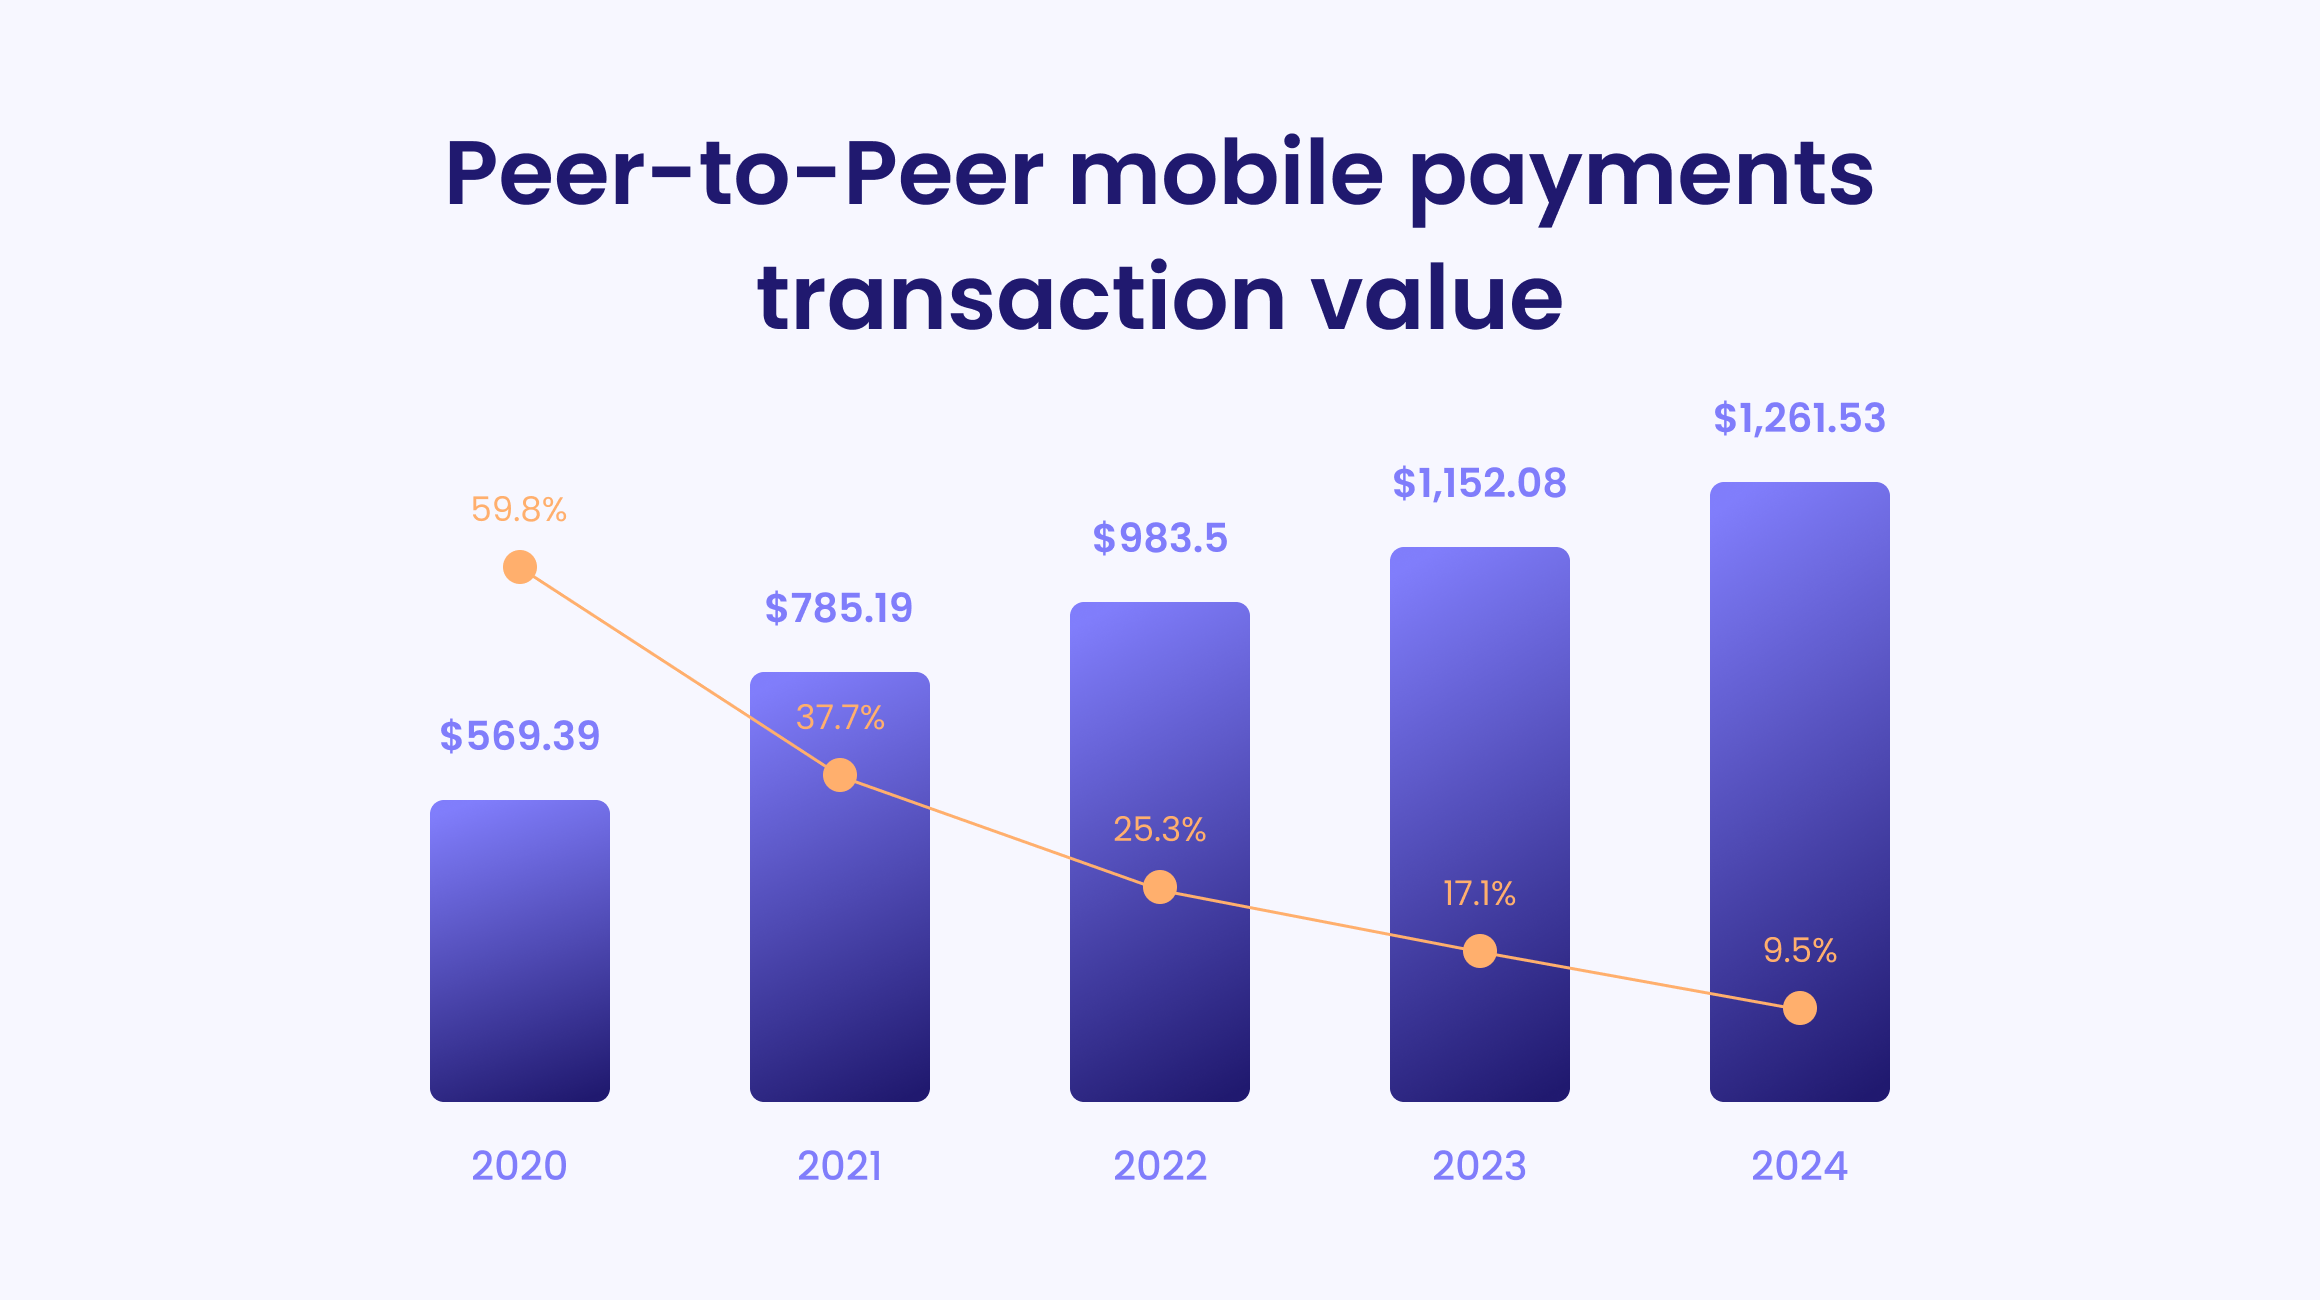 Peer-to-peer mobile payments transaction value 